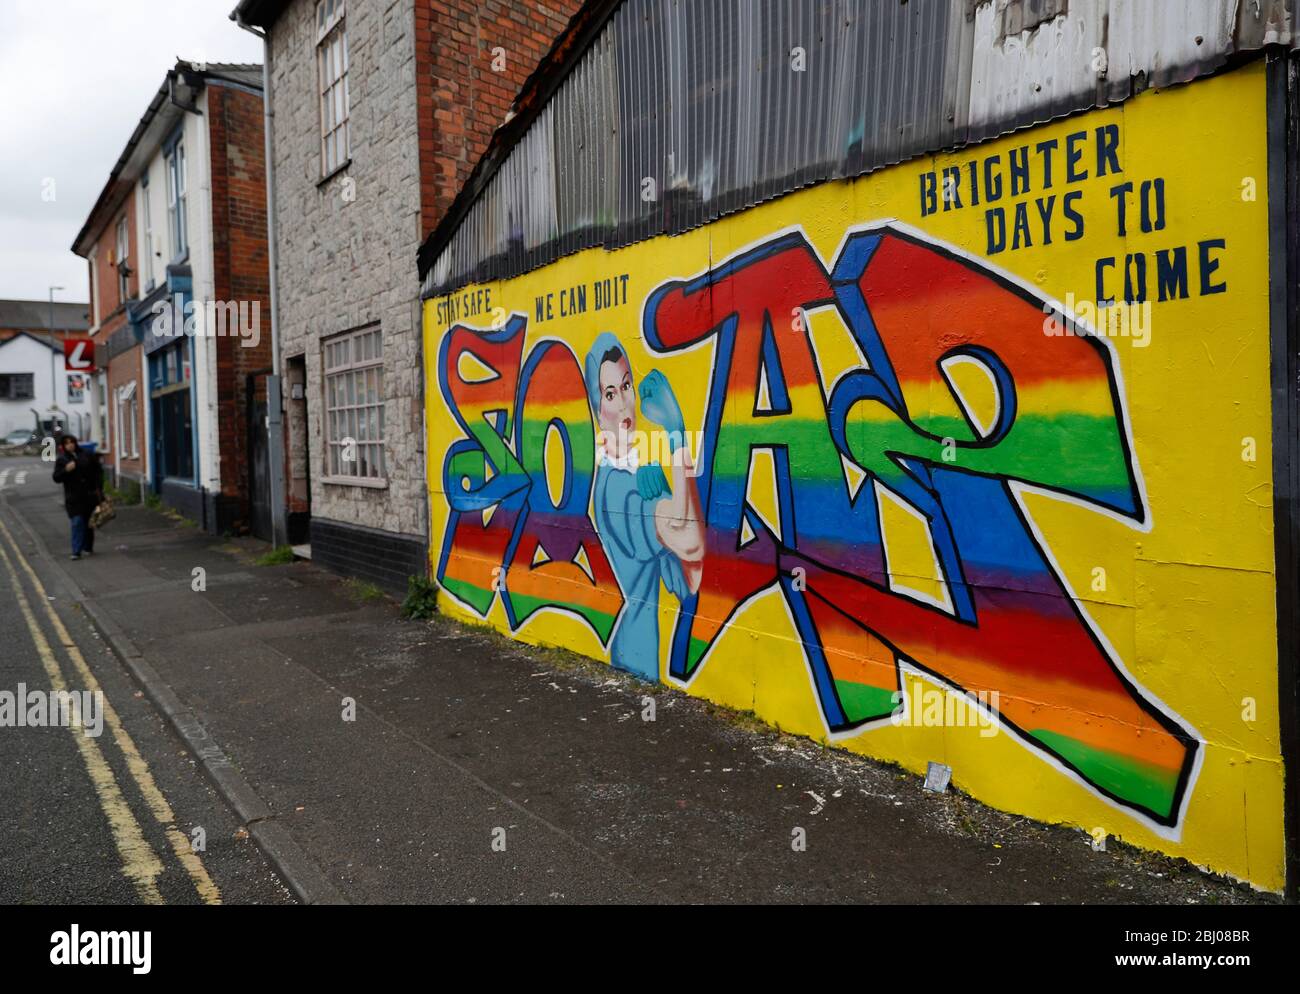 Derby, Derbyshire, UK. 28th April 2020. A woman walks towards Covid-19 related street art during the coronavirus pandemic lockdown. Credit Darren Staples/Alamy Live News. Stock Photo